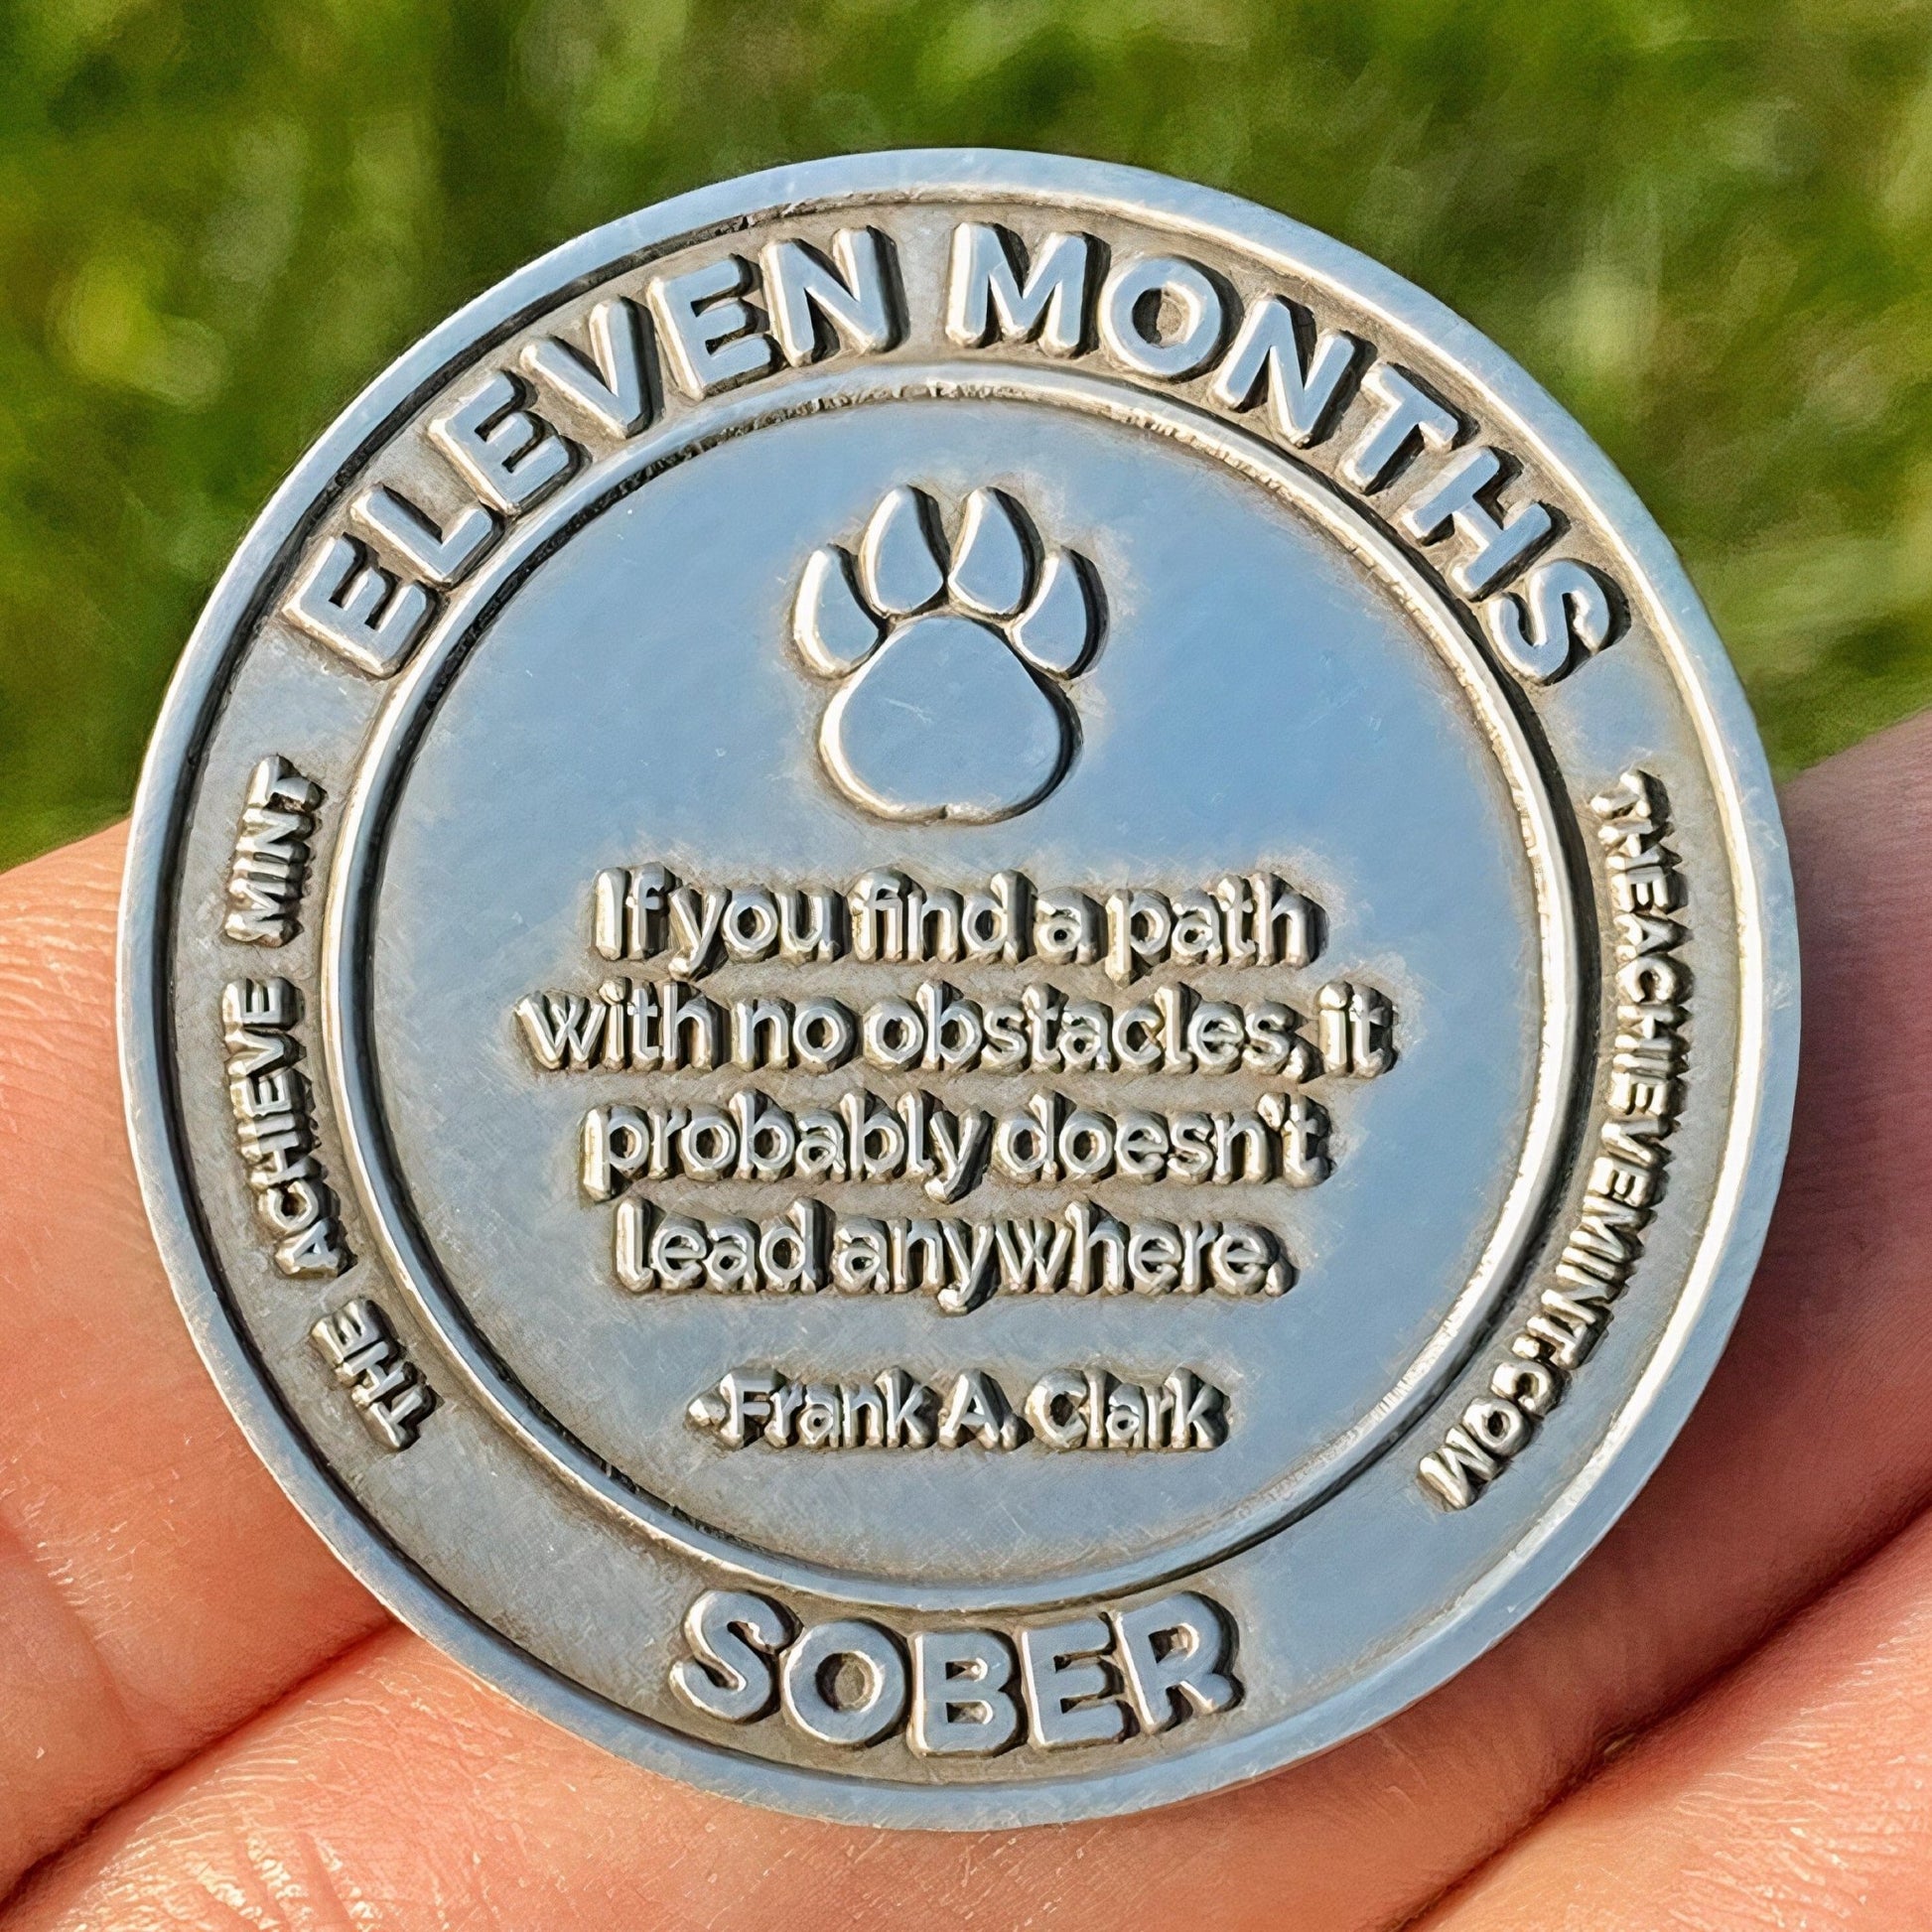 Eleven Months Sober sobriety coin - The Achieve Mint